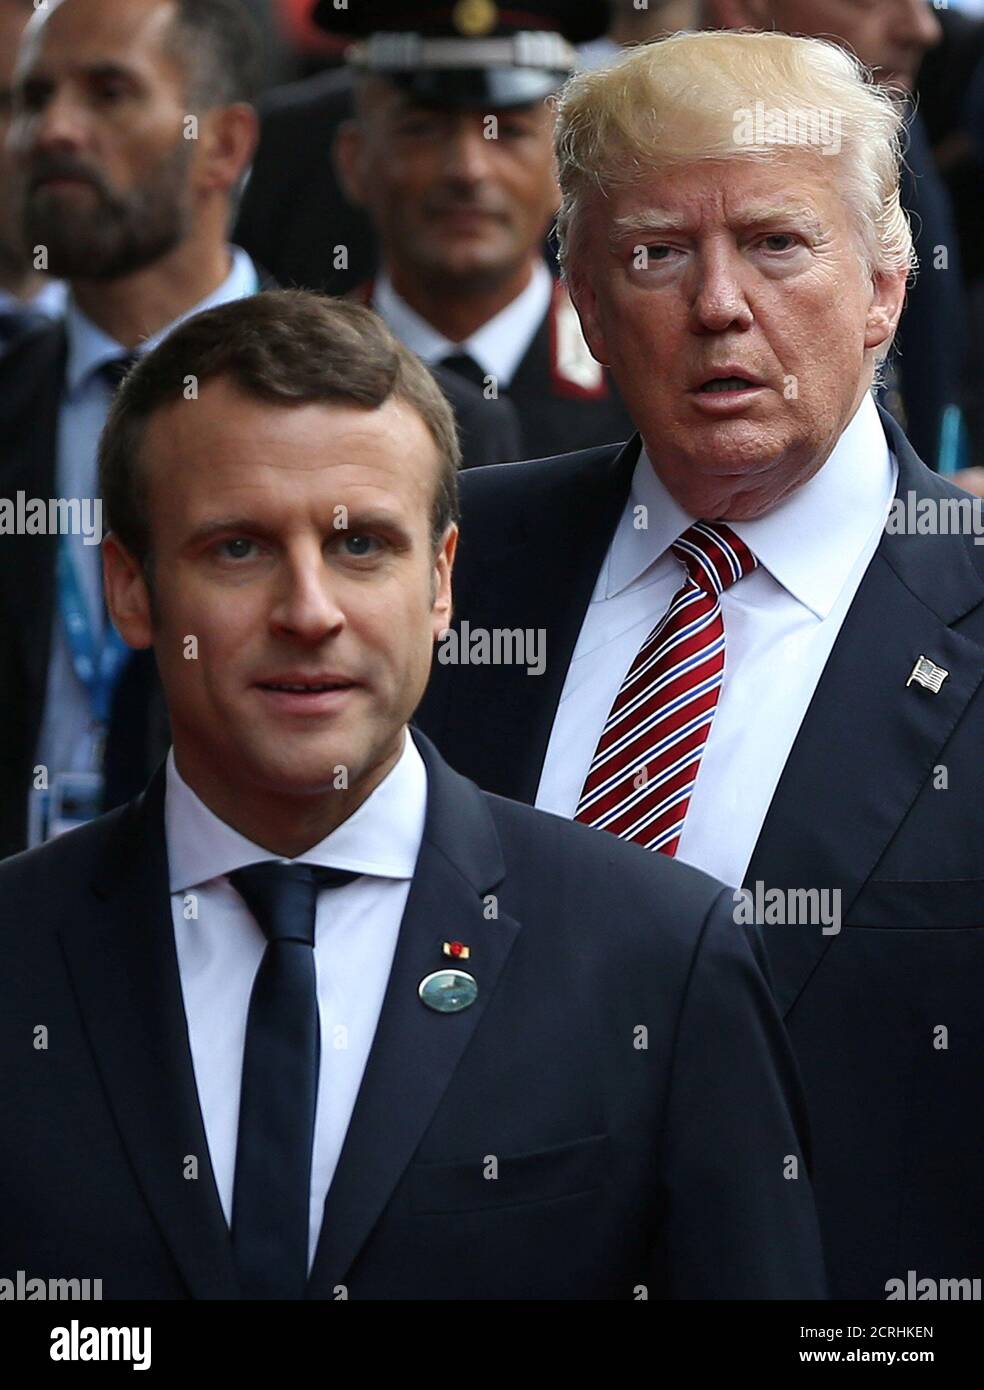 France’s President Emmanuel Macron and U.S. President Donald Trump attend the G7 summit in Taormina, Sicily, Italy, May 26, 2017. REUTERS/Alessandro Bianchi Stock Photo